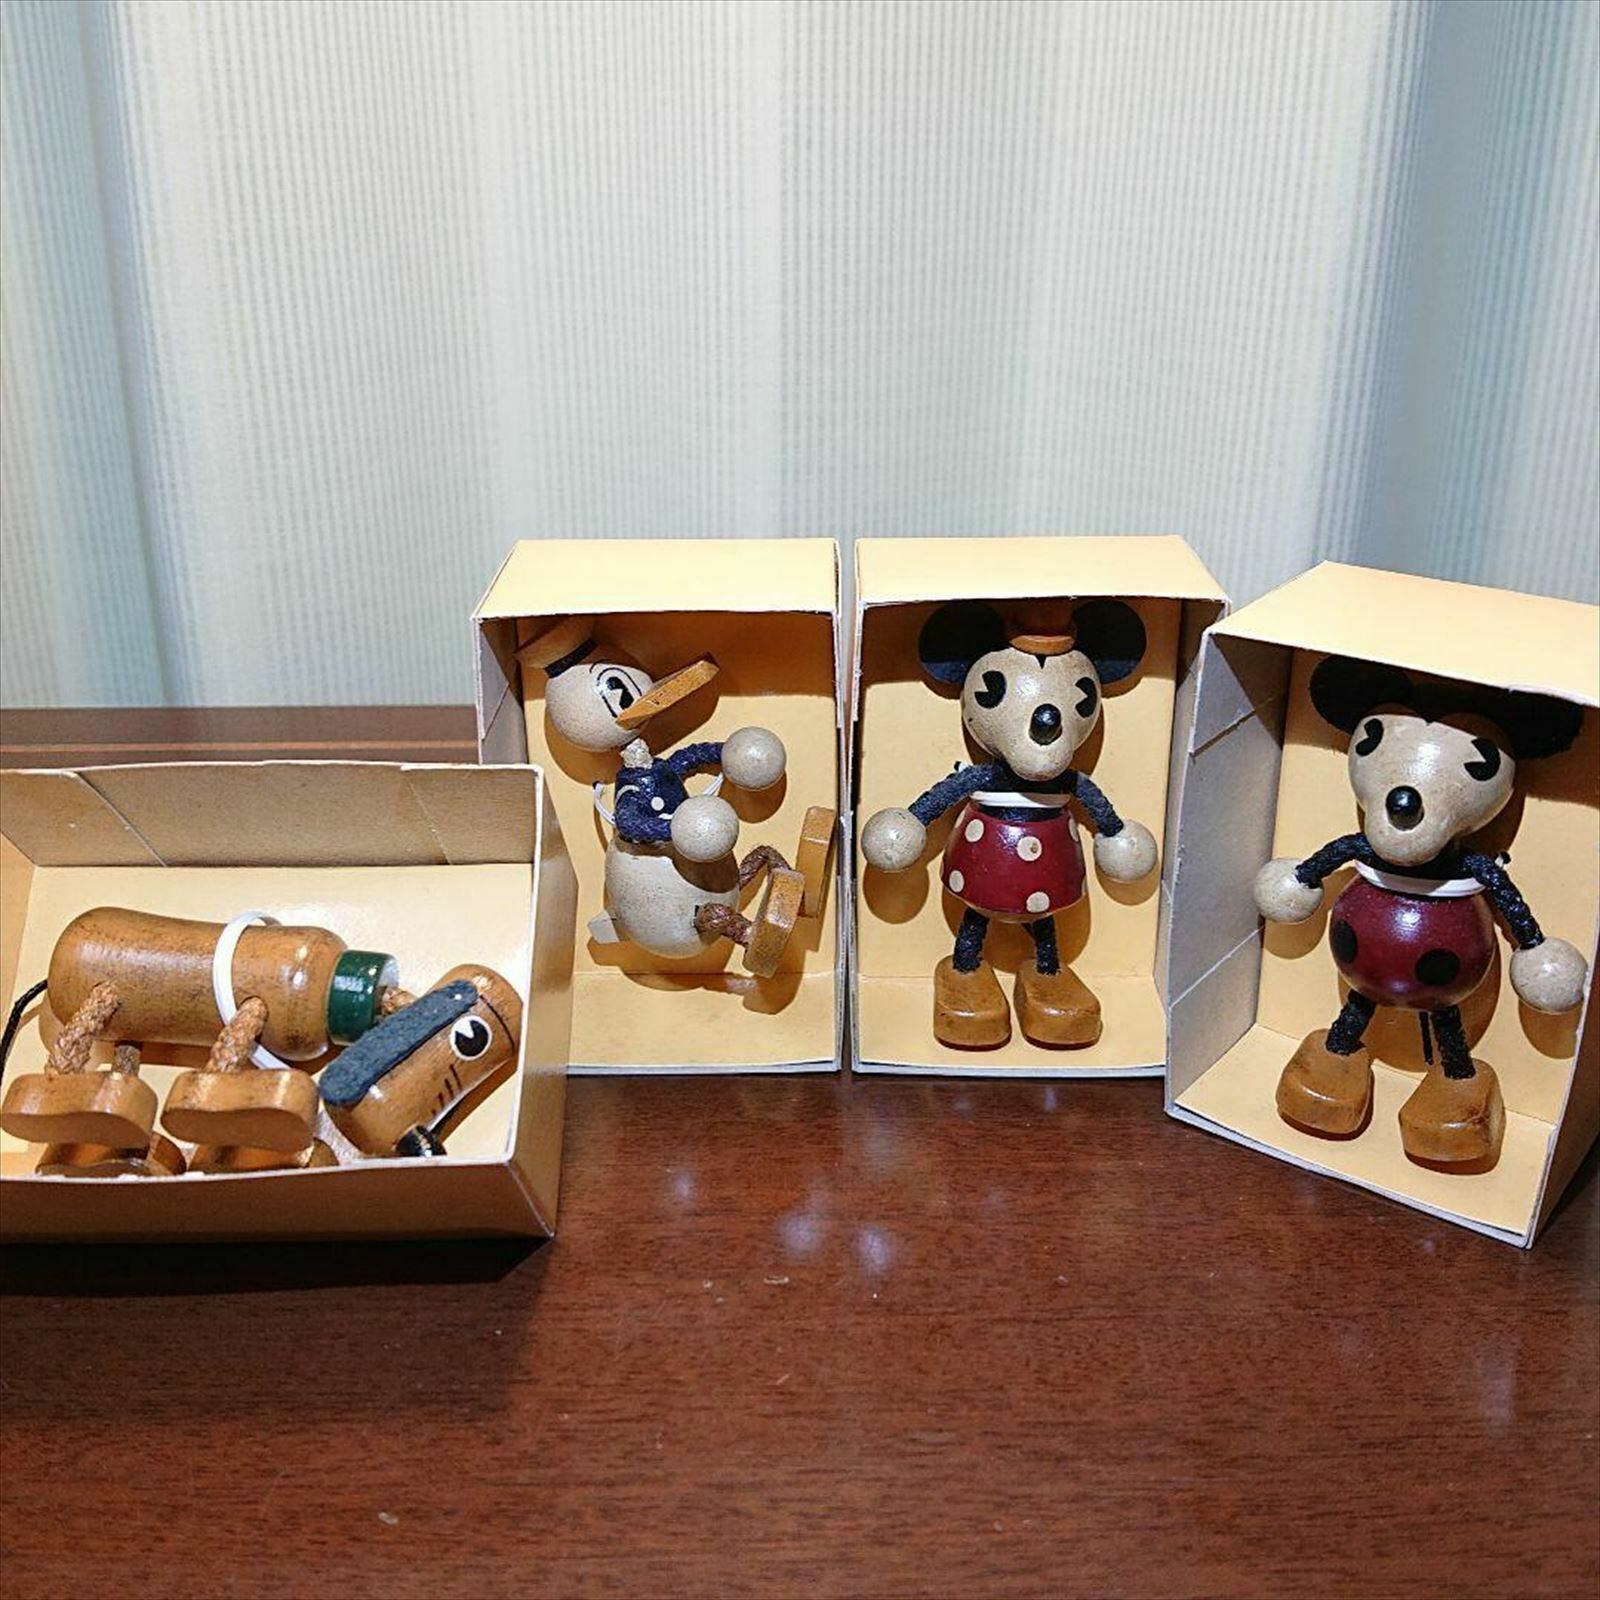 Rare Disney Classic Wooden Doll Toy Mickey Minnie Mouse Donald Duck Pluto Figure